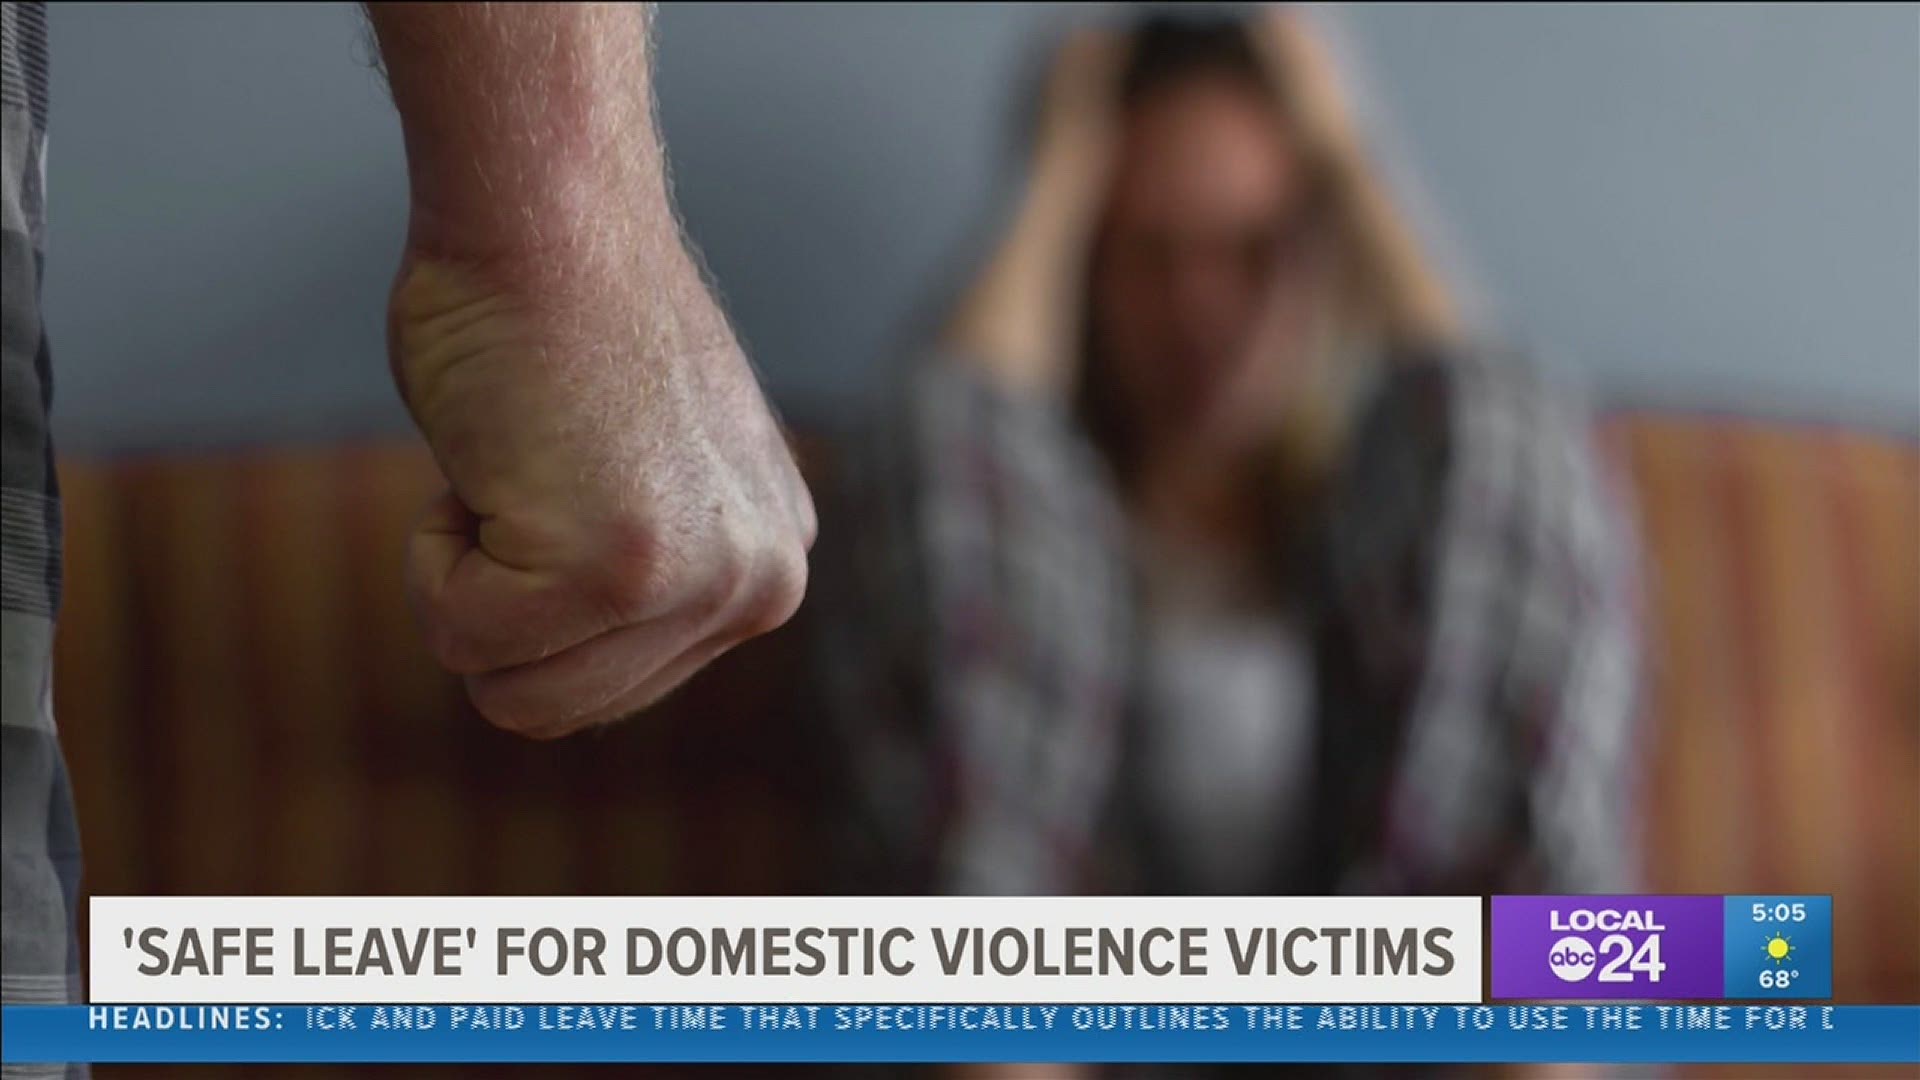 Mayor Lee Harris is advocating for a policy change to the county's sick leave policy that would make it easier for domestic violence victims to seek help.